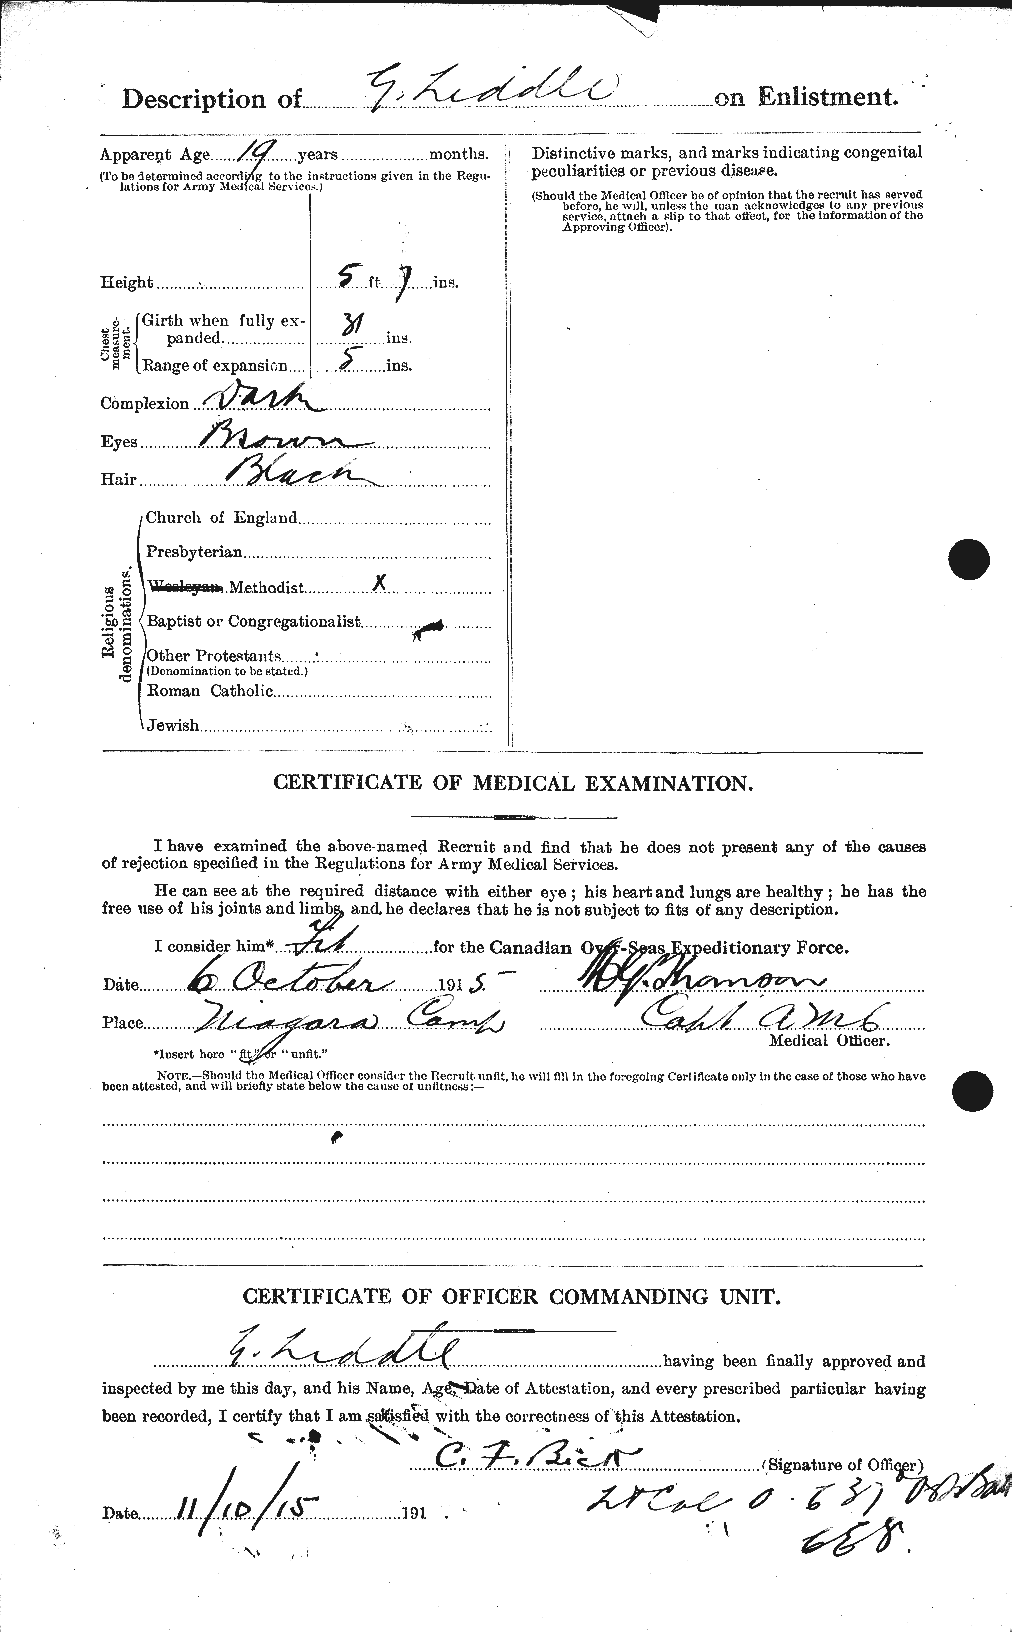 Personnel Records of the First World War - CEF 465316b